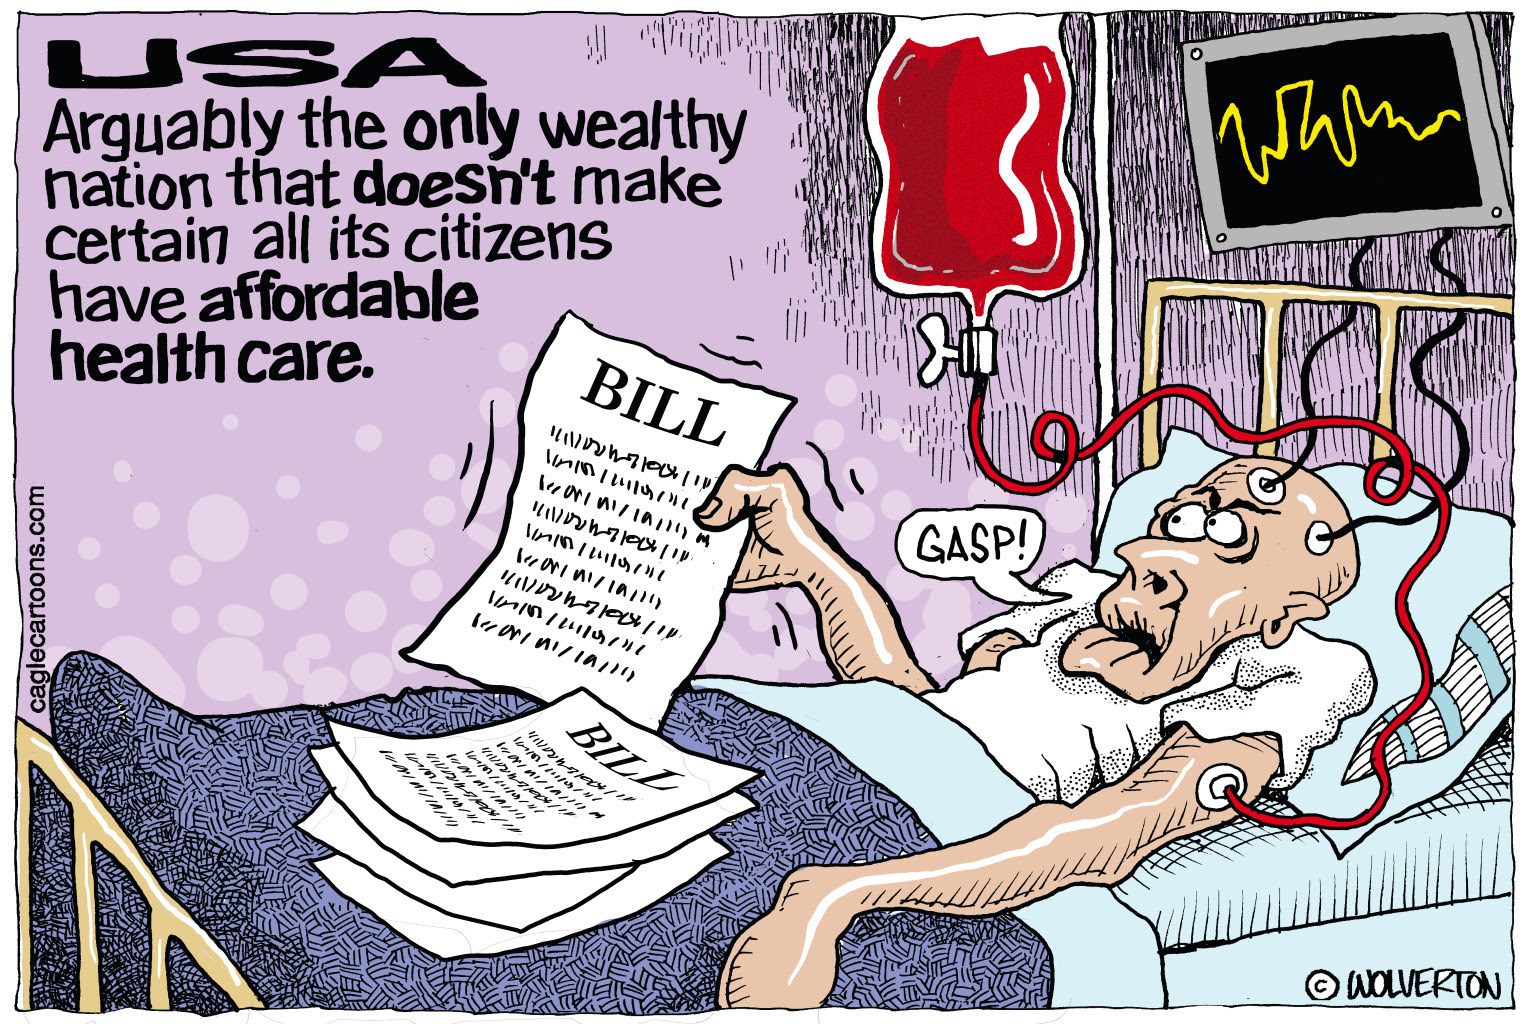 Republicans deny the needy healthcare and social security